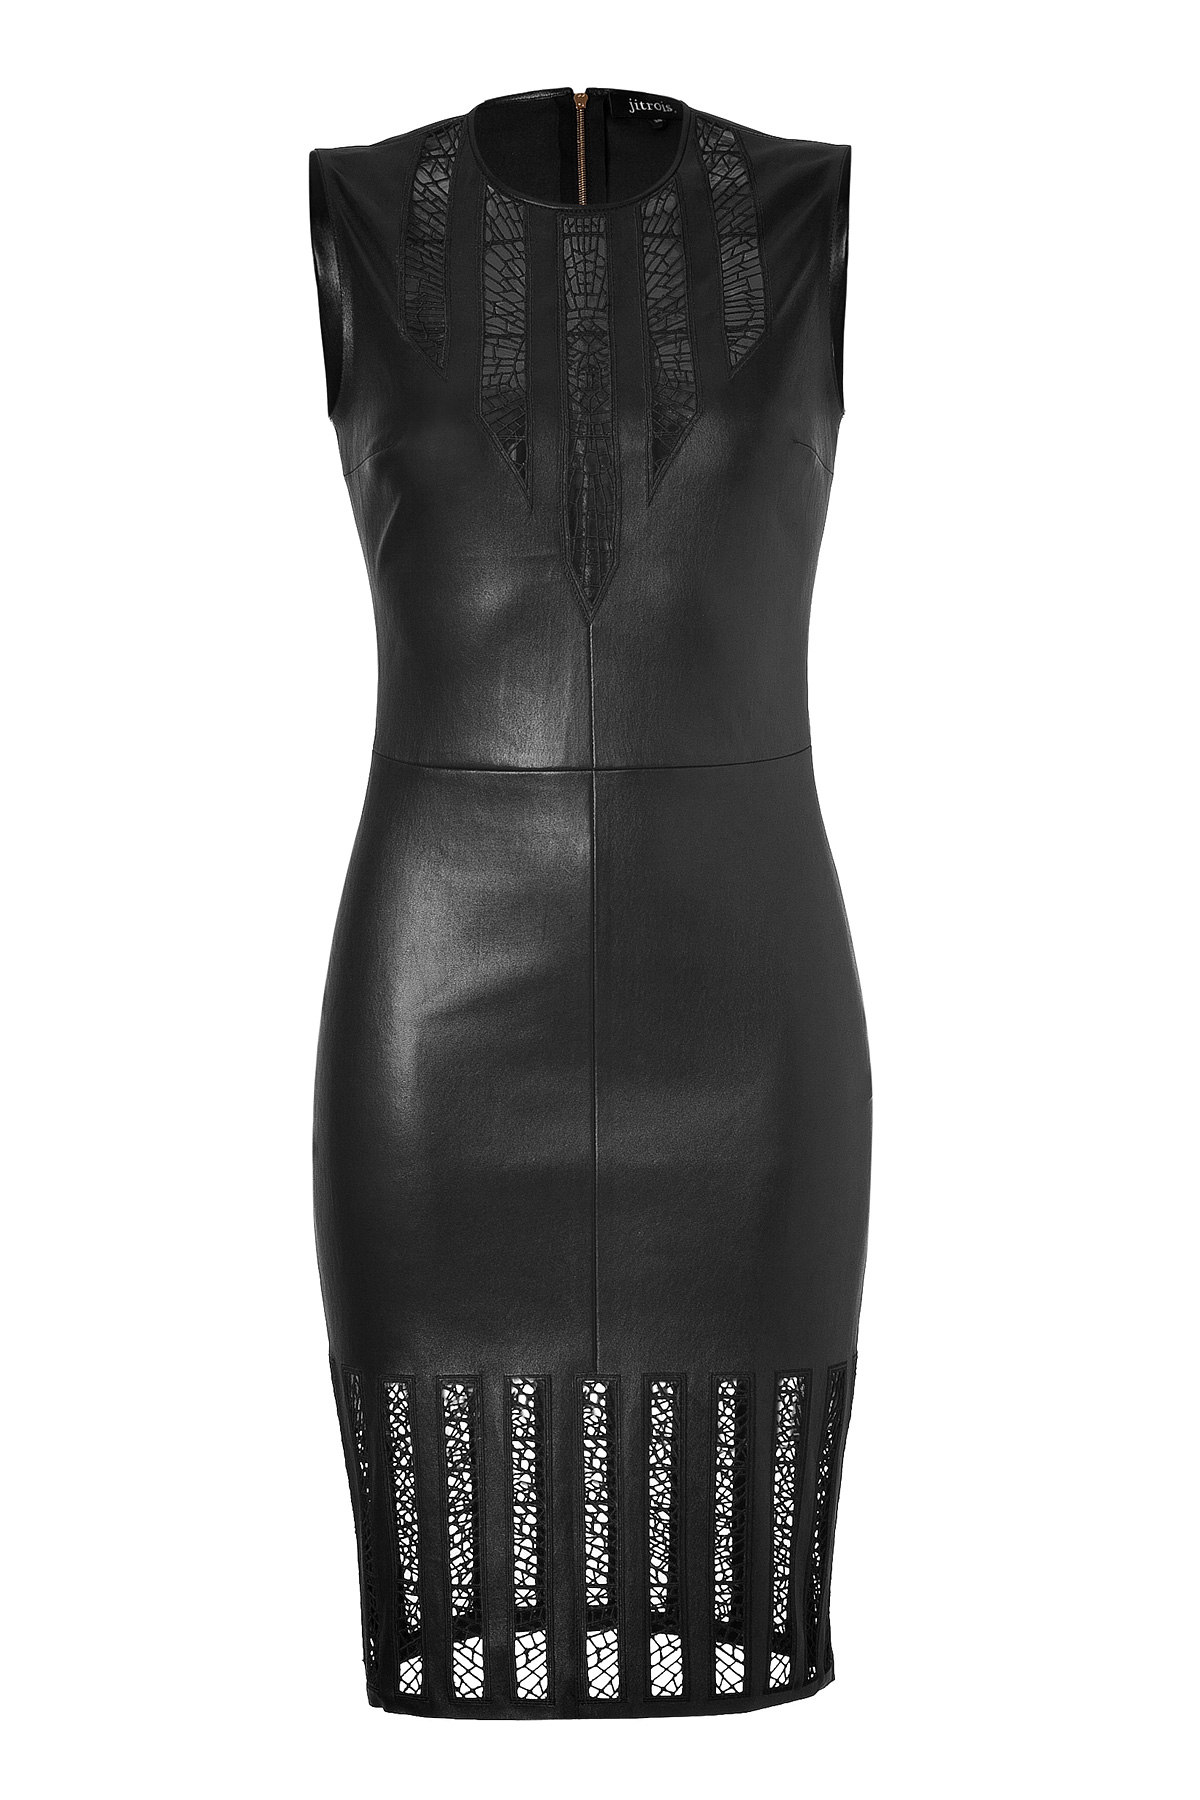 Lyst - Jitrois Black Leather Cathedral Dress in Black